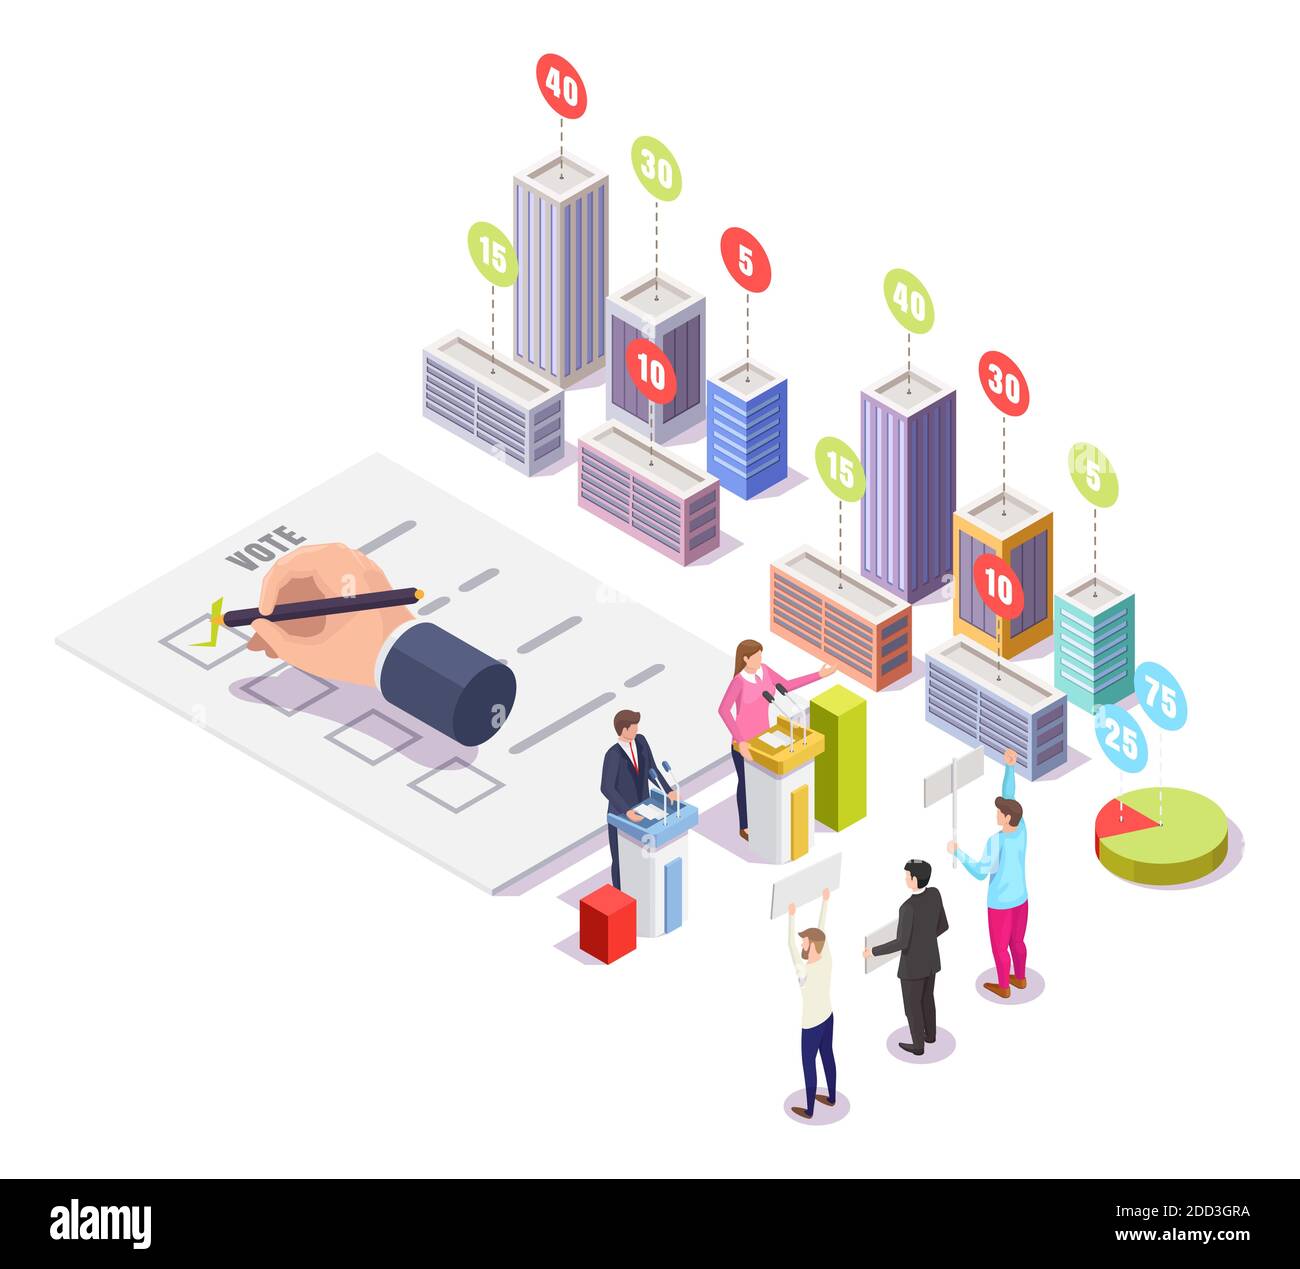 Election campaign, polling day, vector isometric illustration. Political candidates speech, voters, rating statistics. Stock Vector